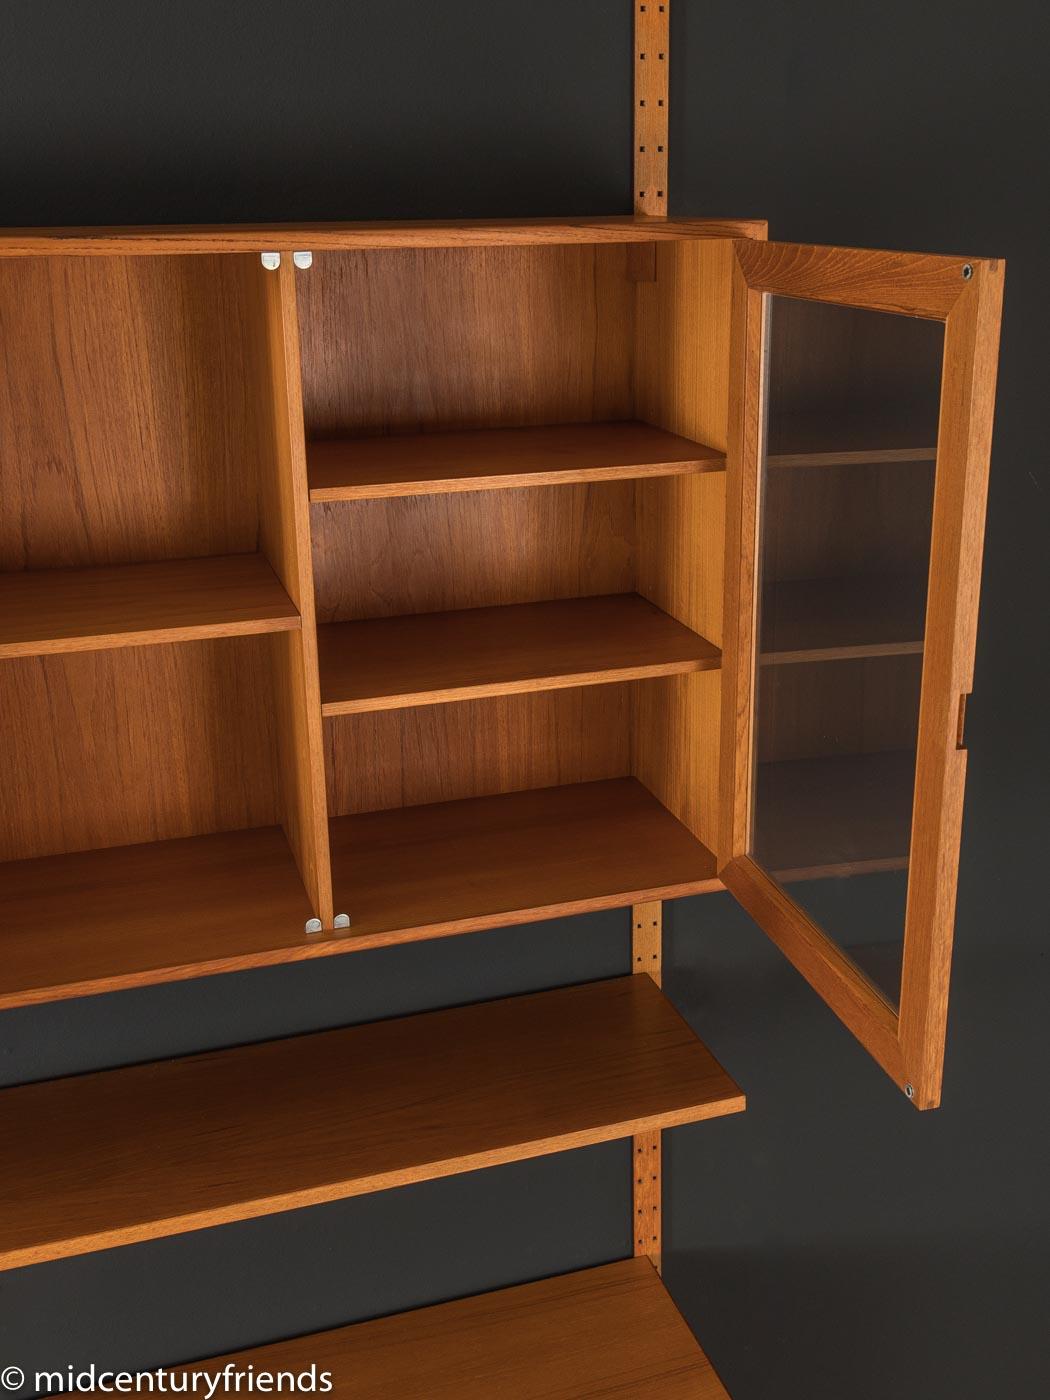 Glass 60s Wall Shelving System by HG Furniture, with Showcase, Magazine Rack, Drawers